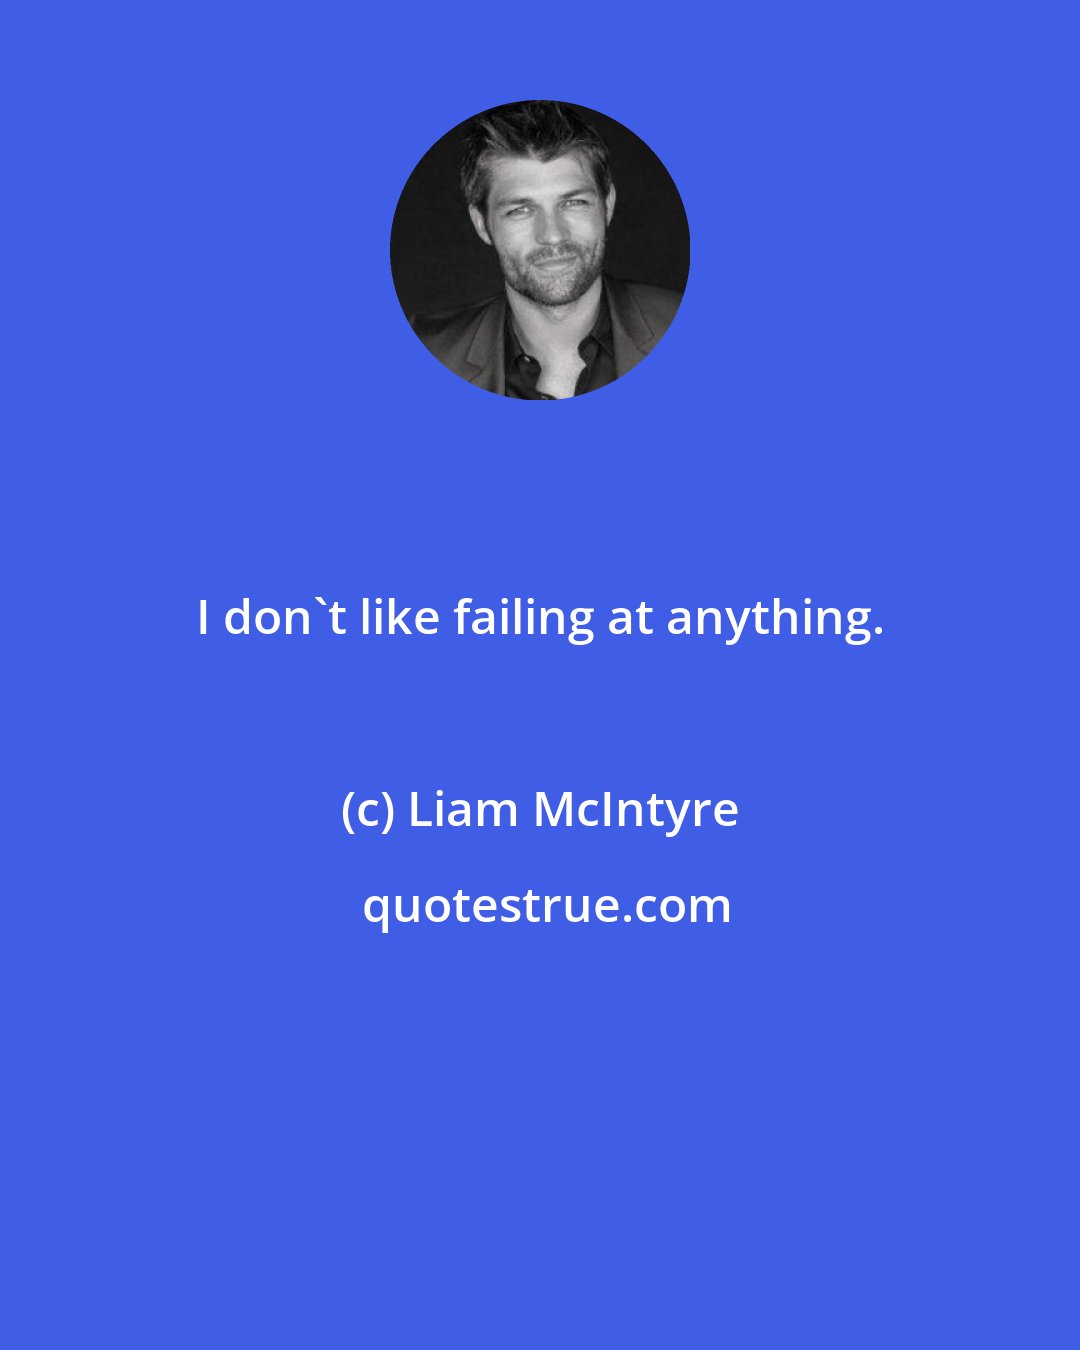 Liam McIntyre: I don't like failing at anything.